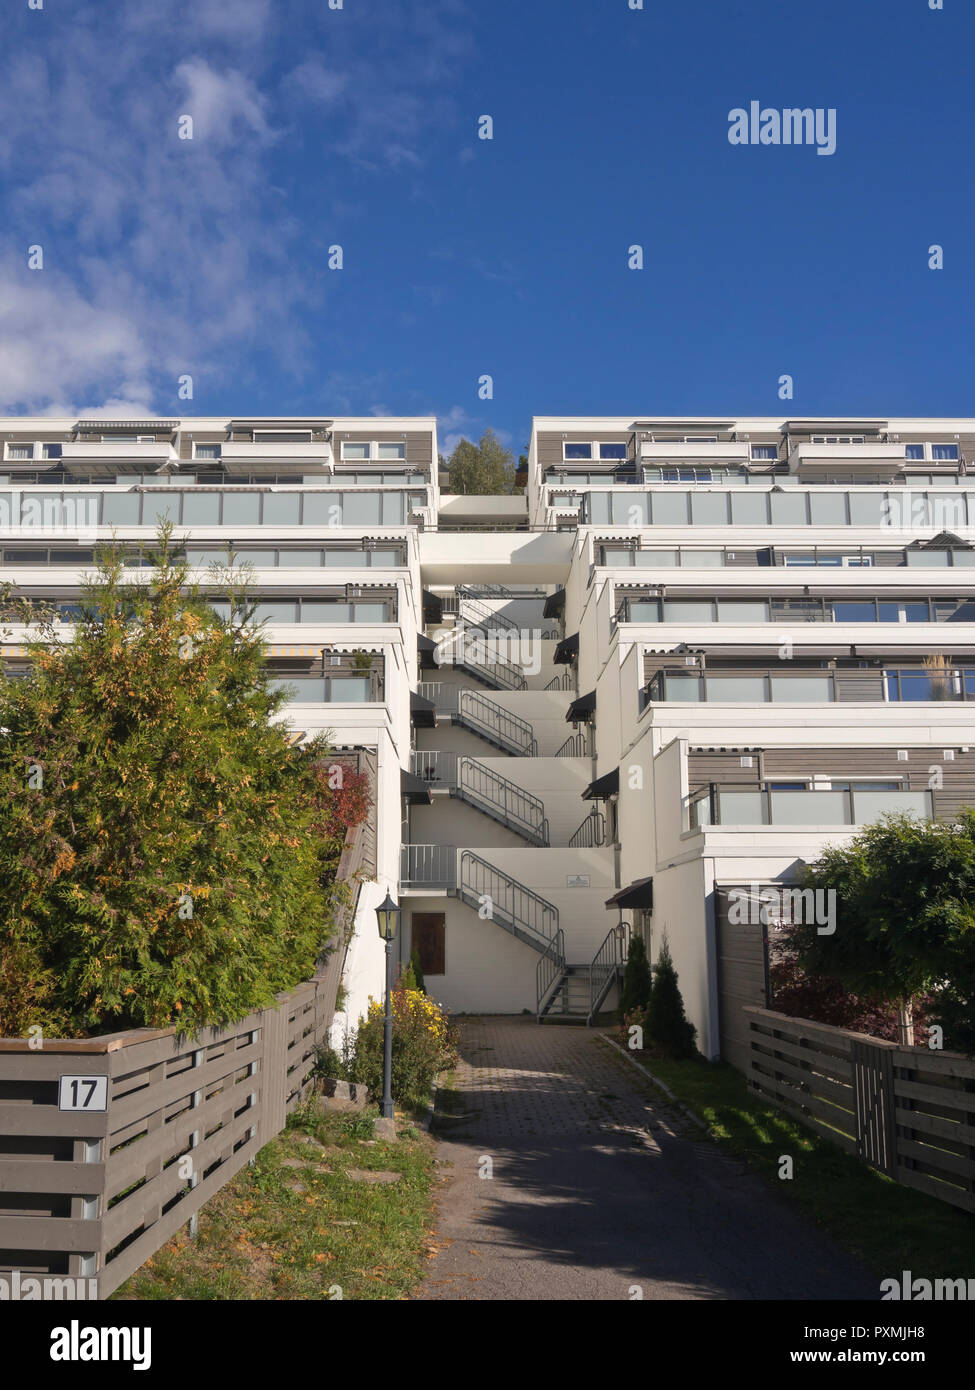 Terraced apartment block in the suburb of Holmlia in Oslo Noway, popular architecture with large terraces and flowerboxes Stock Photo